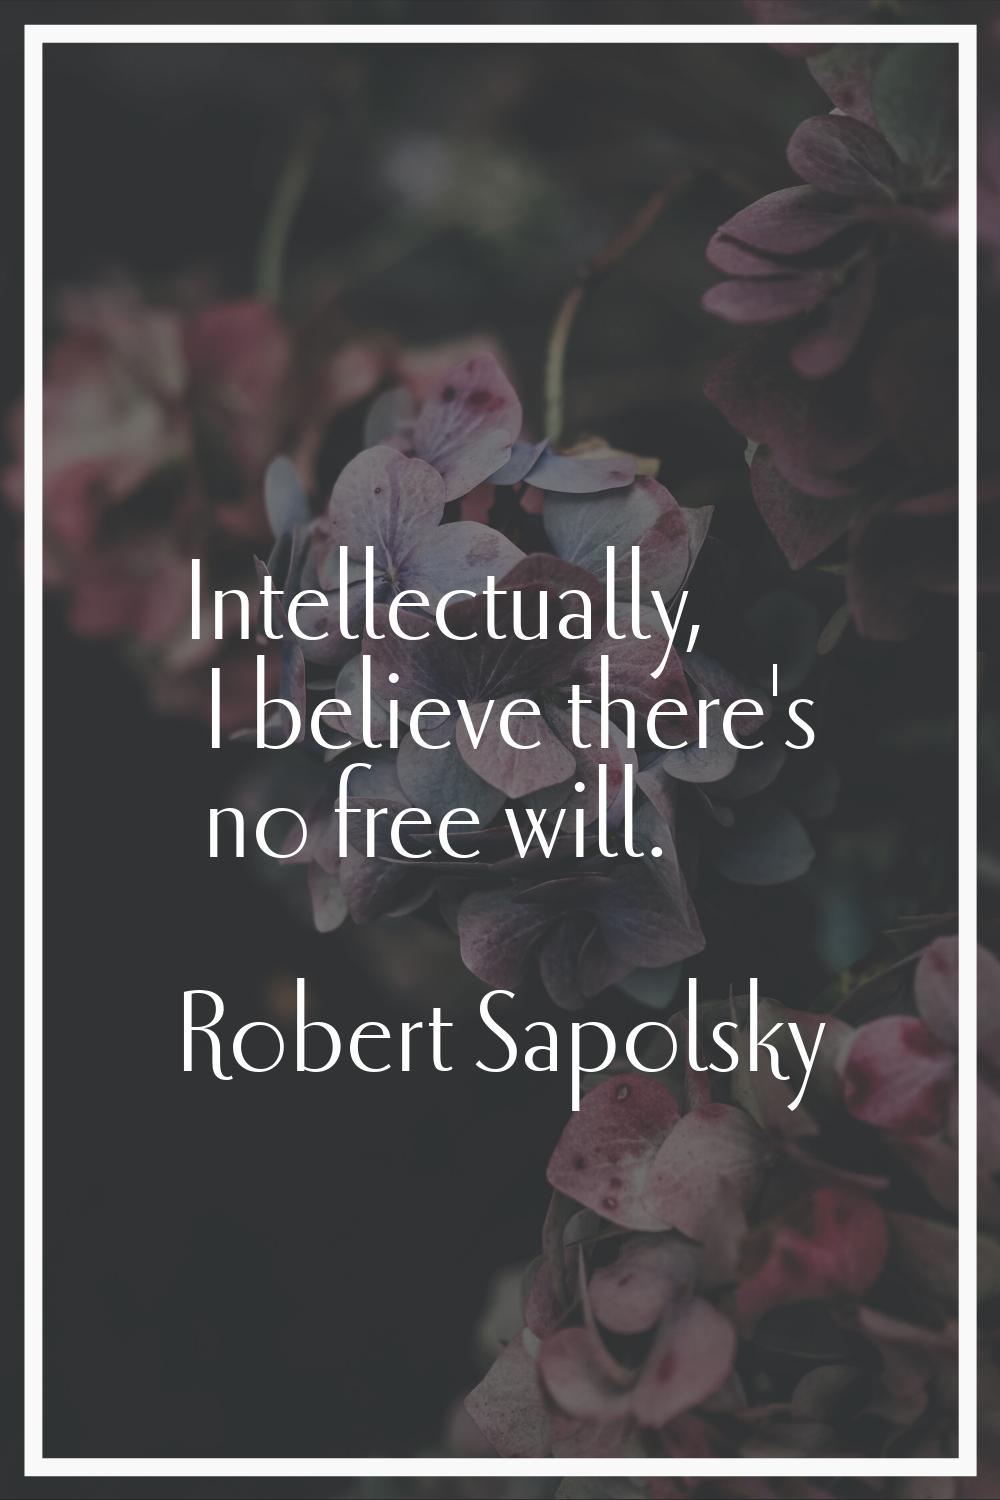 Intellectually, I believe there's no free will.